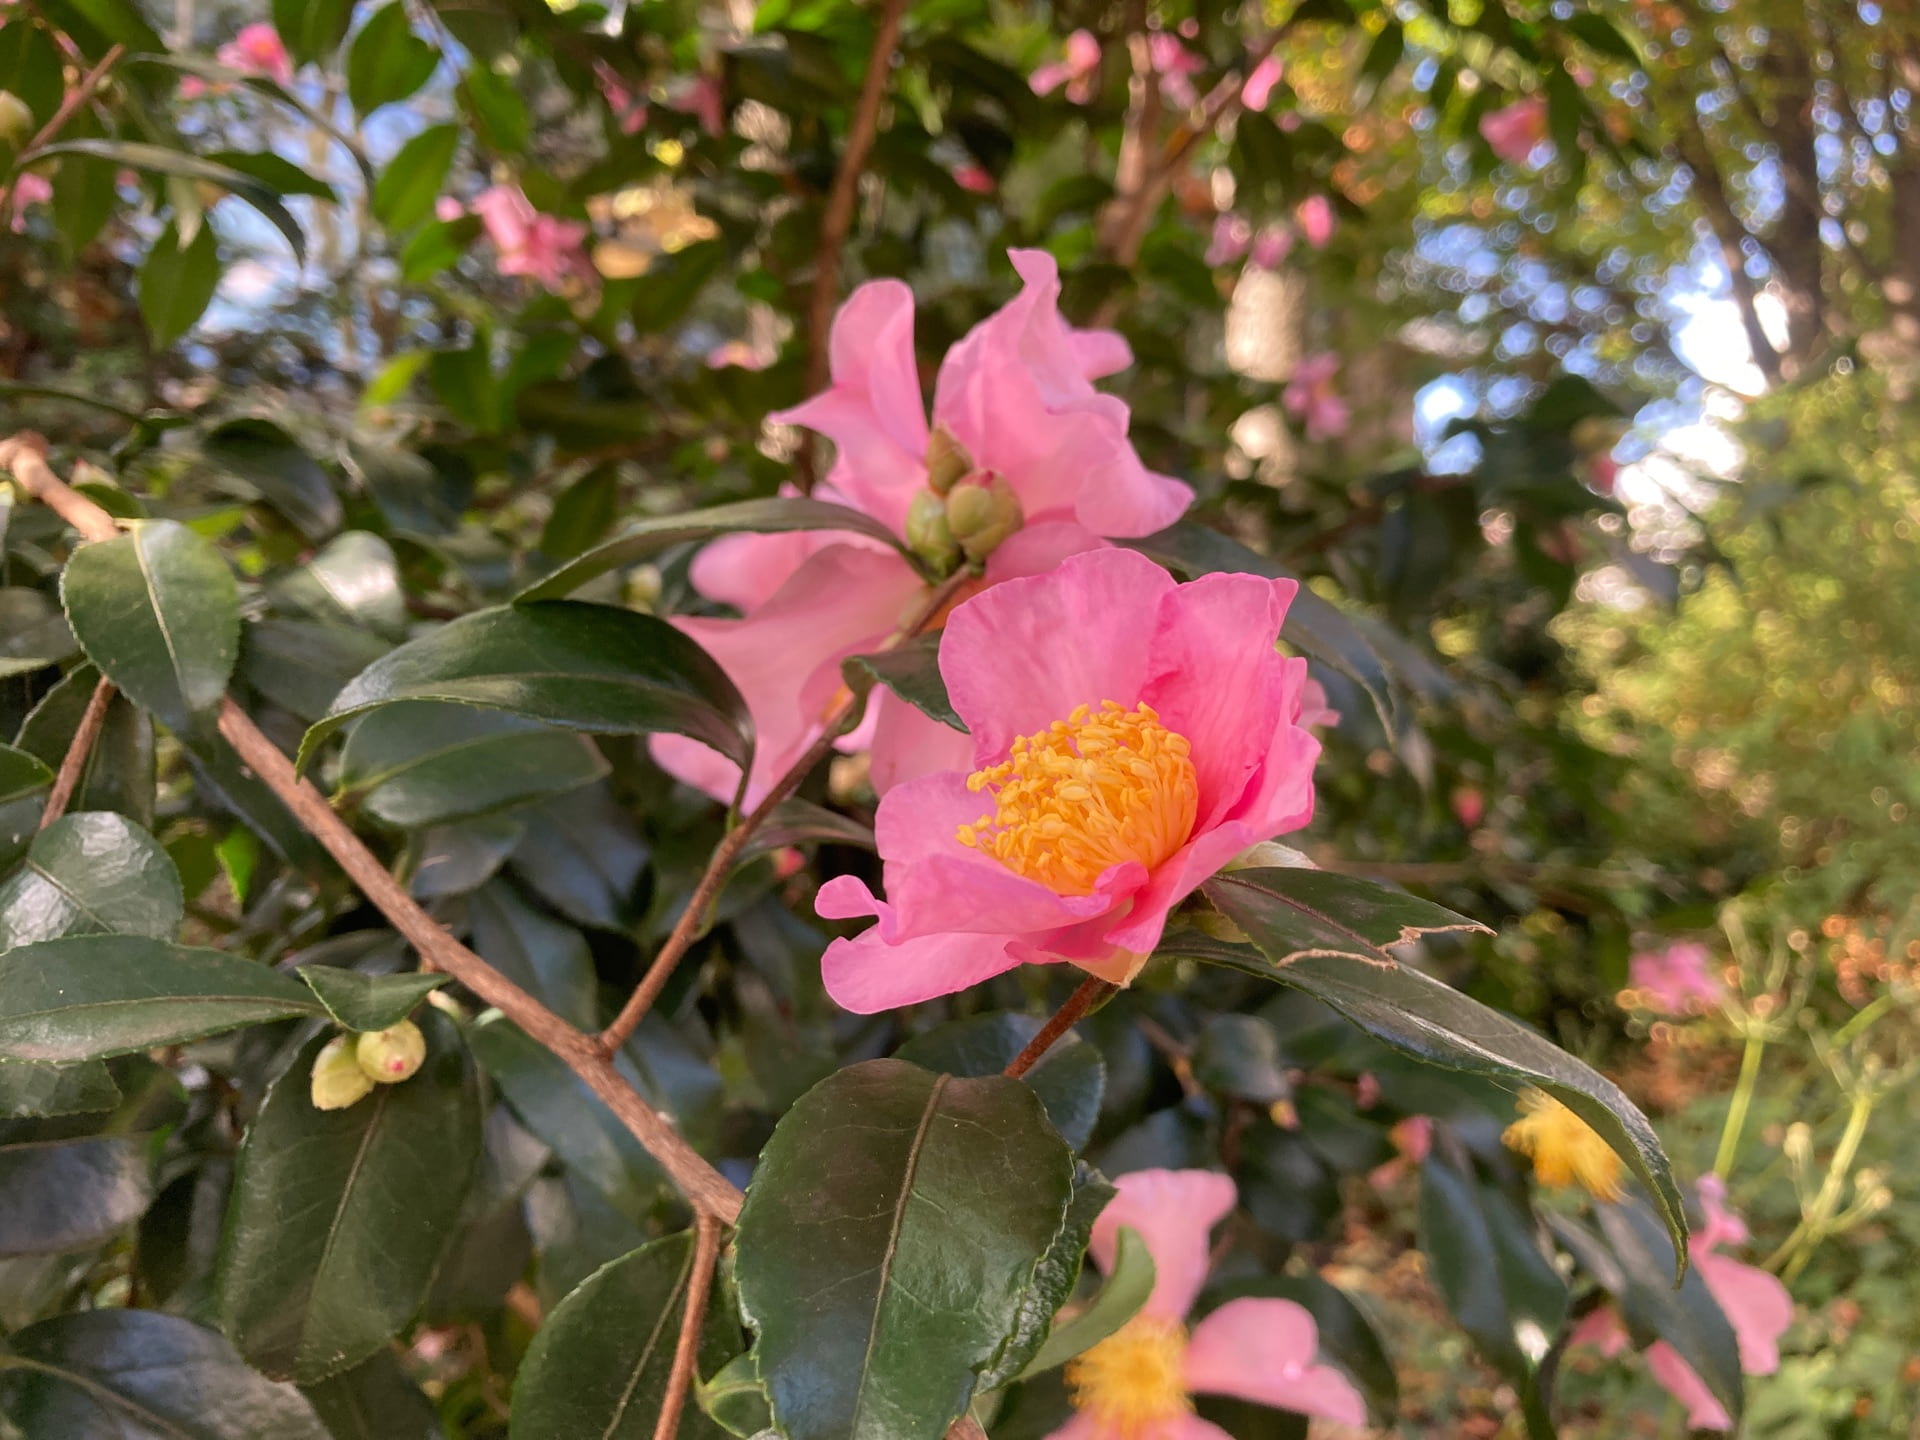 Camellia sasanqua is one of the most hardy Camellia species and is the first to bloom.